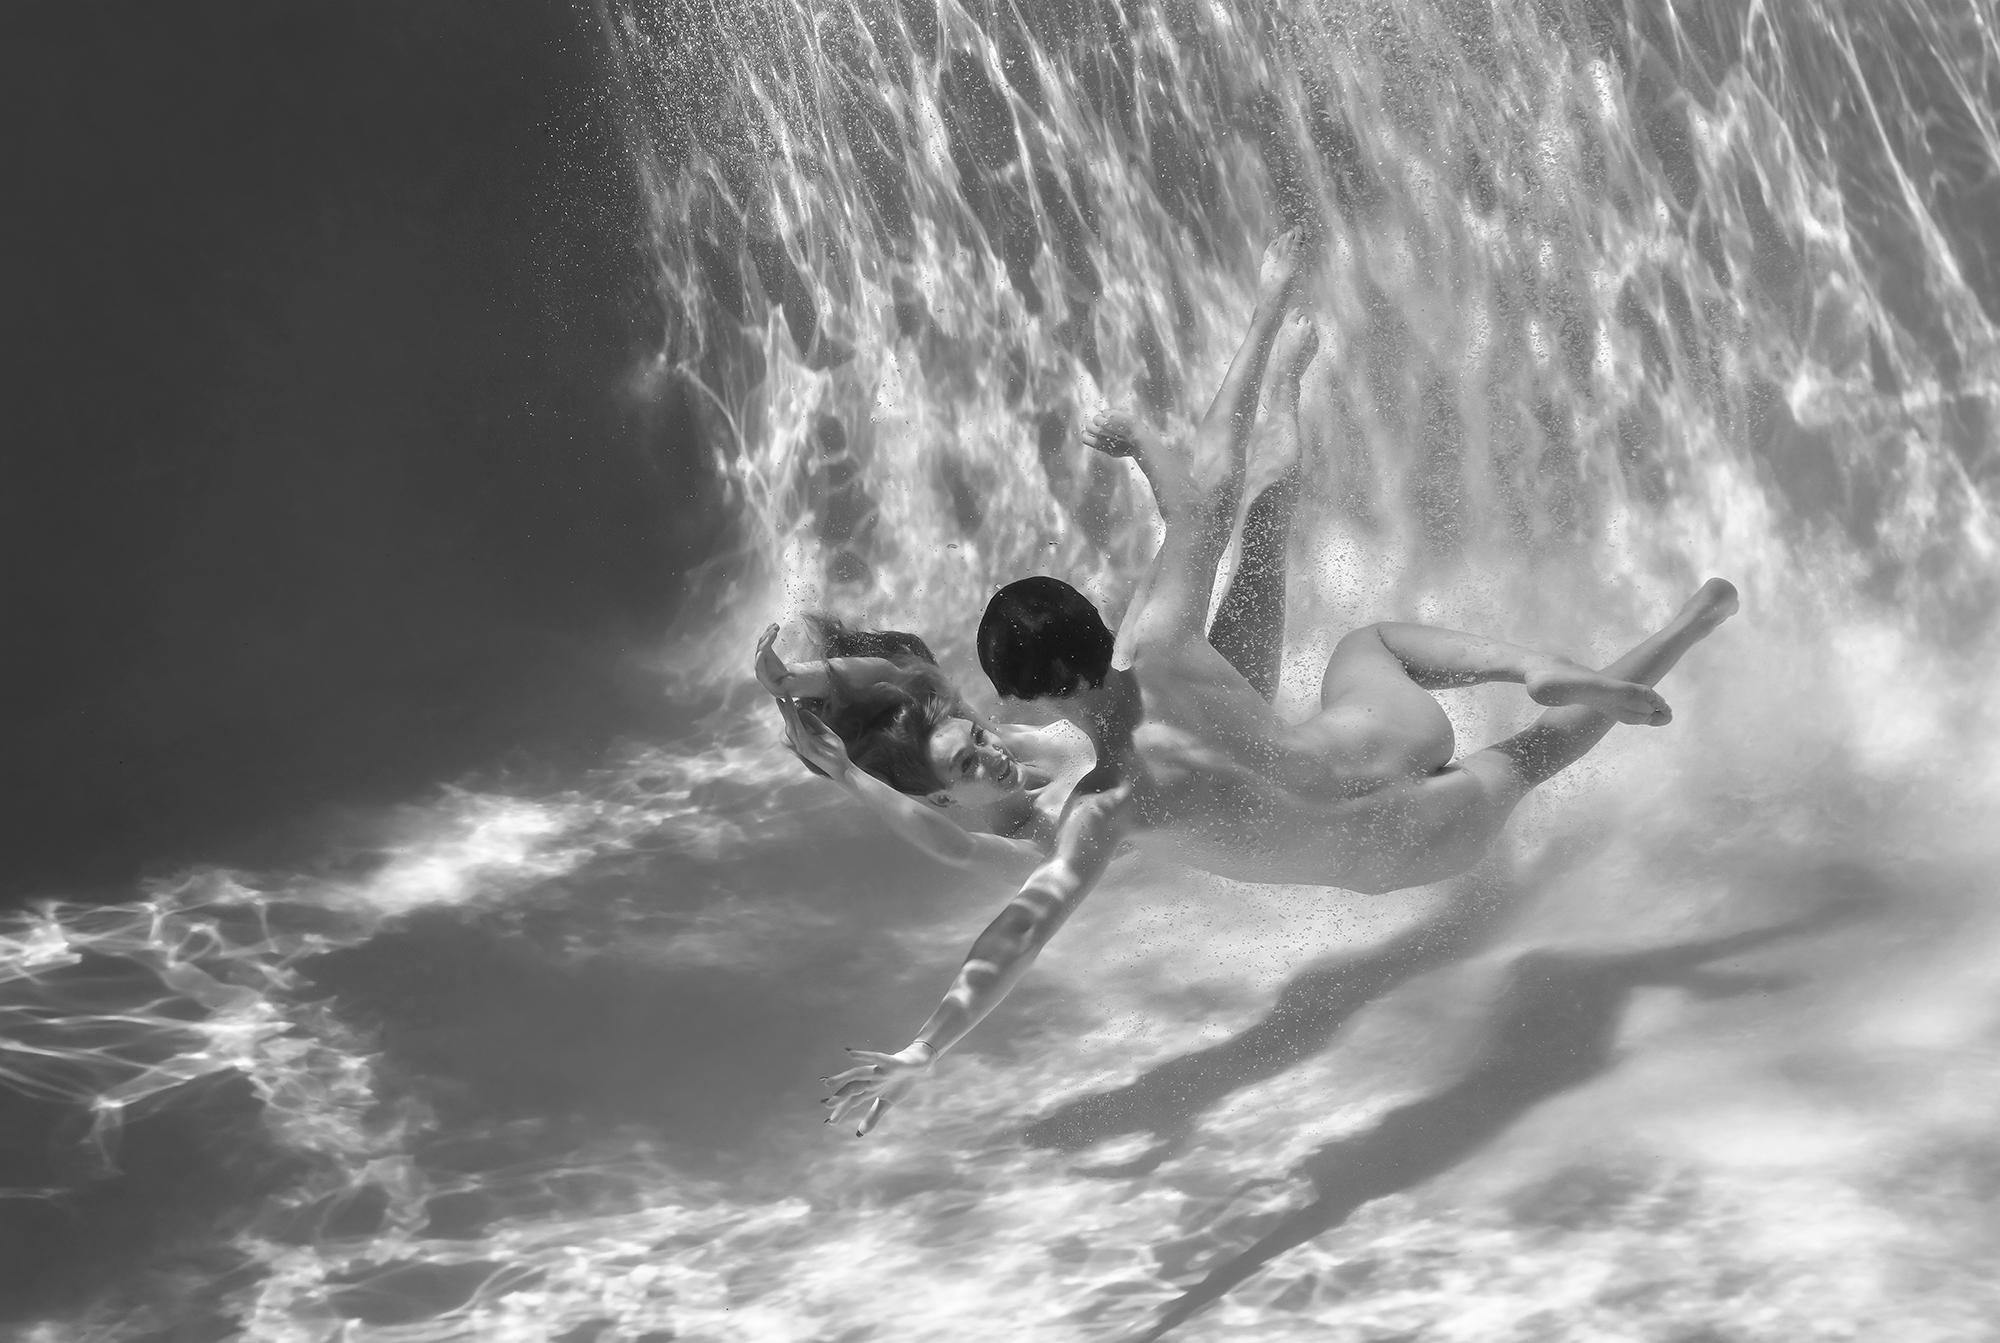 Alex Sher Nude Photograph - Pool Party VII  - underwater black & white photograph - print on paper 36" x 54"